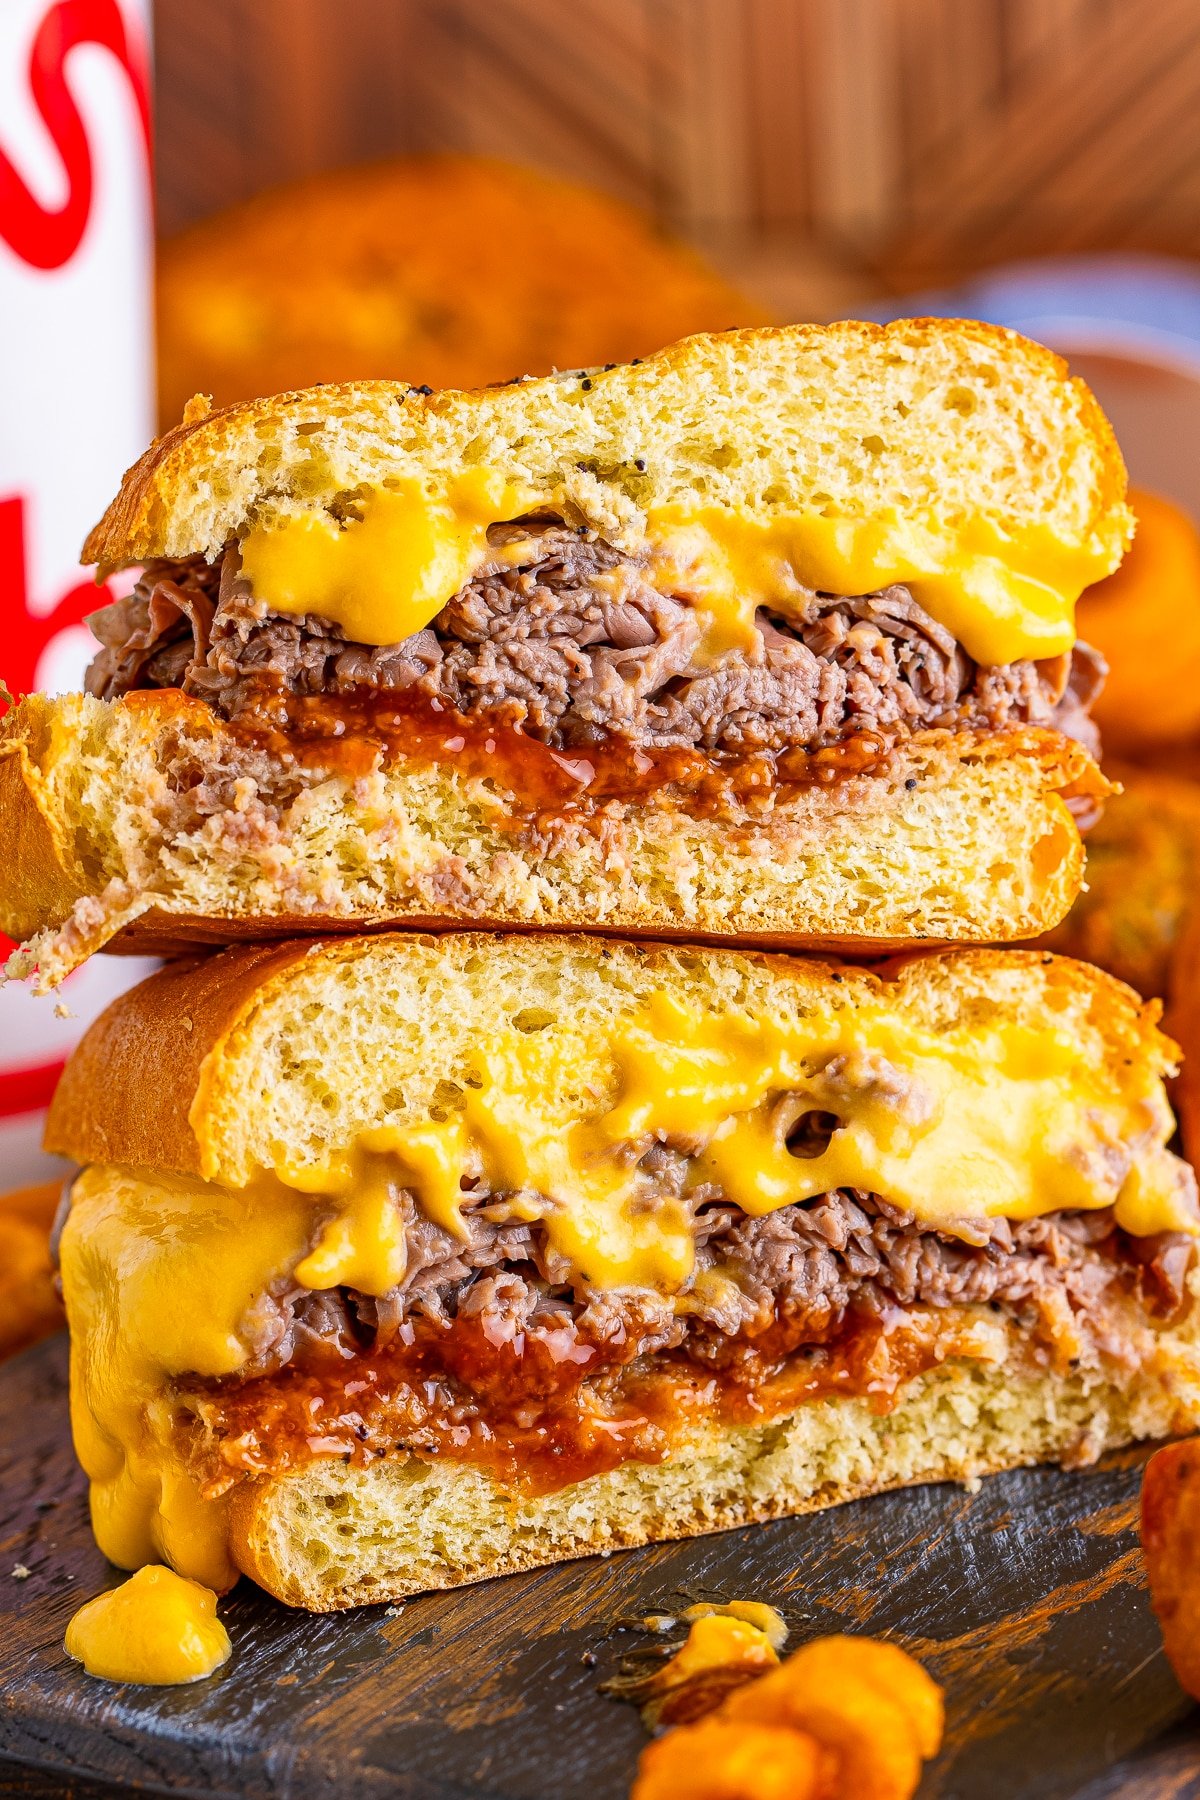 arbys beef and cheddar cut in half and stacked on top of each other